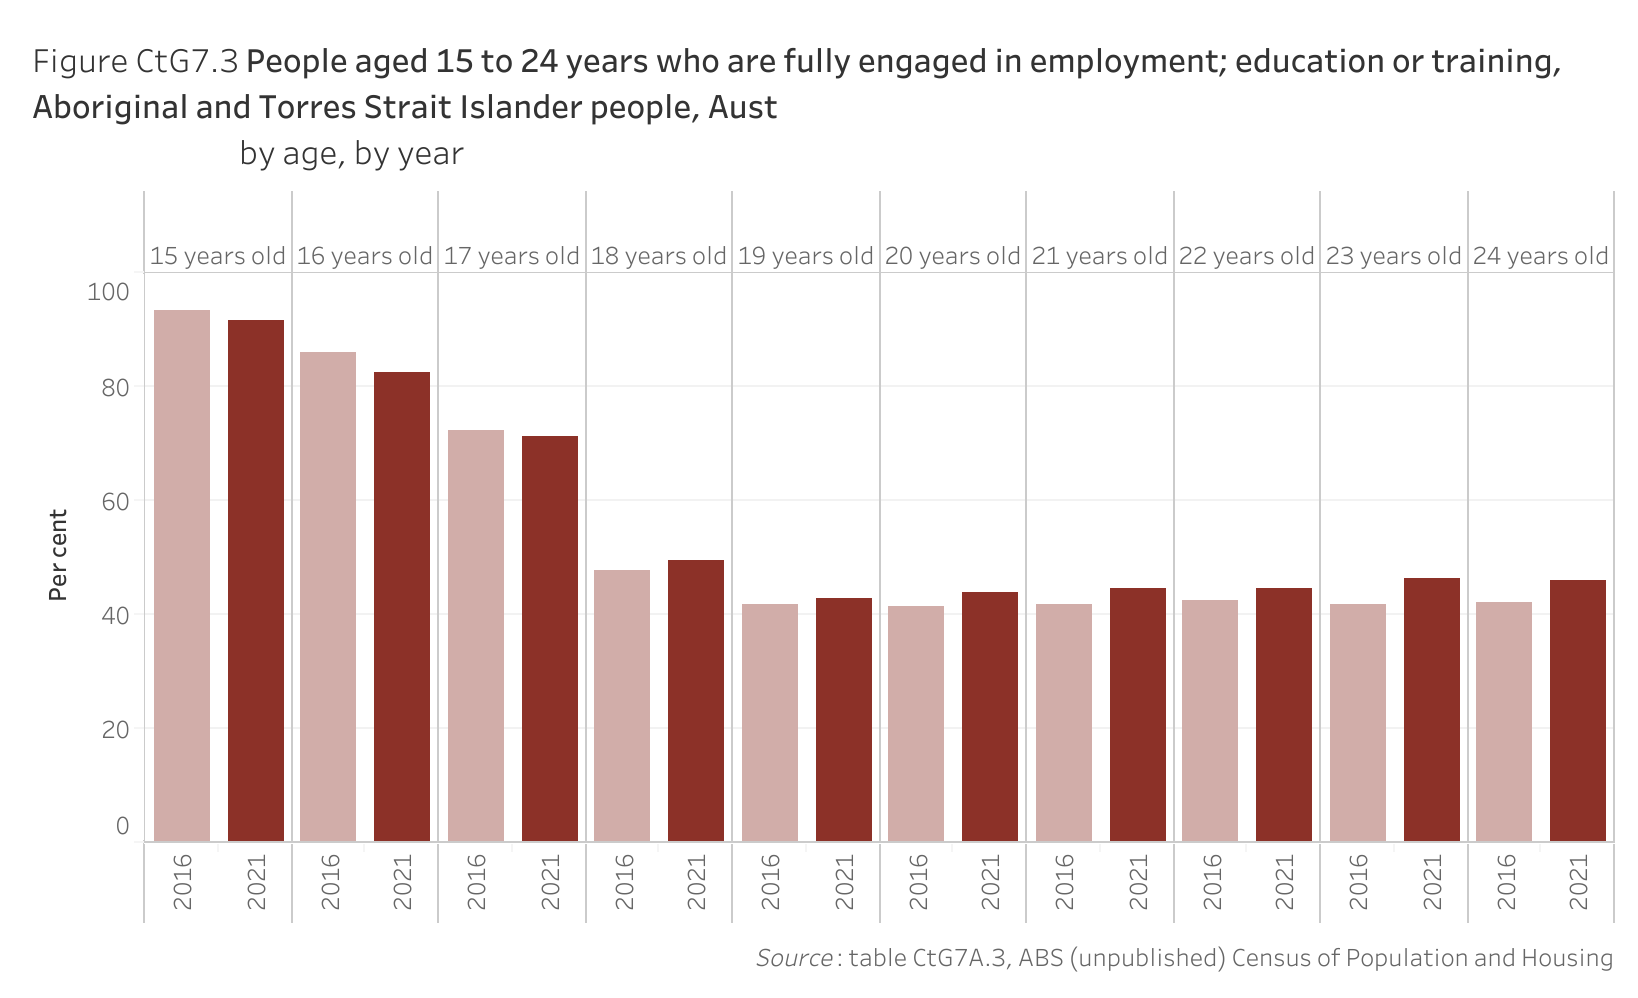 Figure CtG7.3 shows people aged 15 to 24 years who are fully engaged in employment; education or training, Aboriginal and Torres Strait Islander people, Australia, by age, by year. More details can be found within the text near this image.